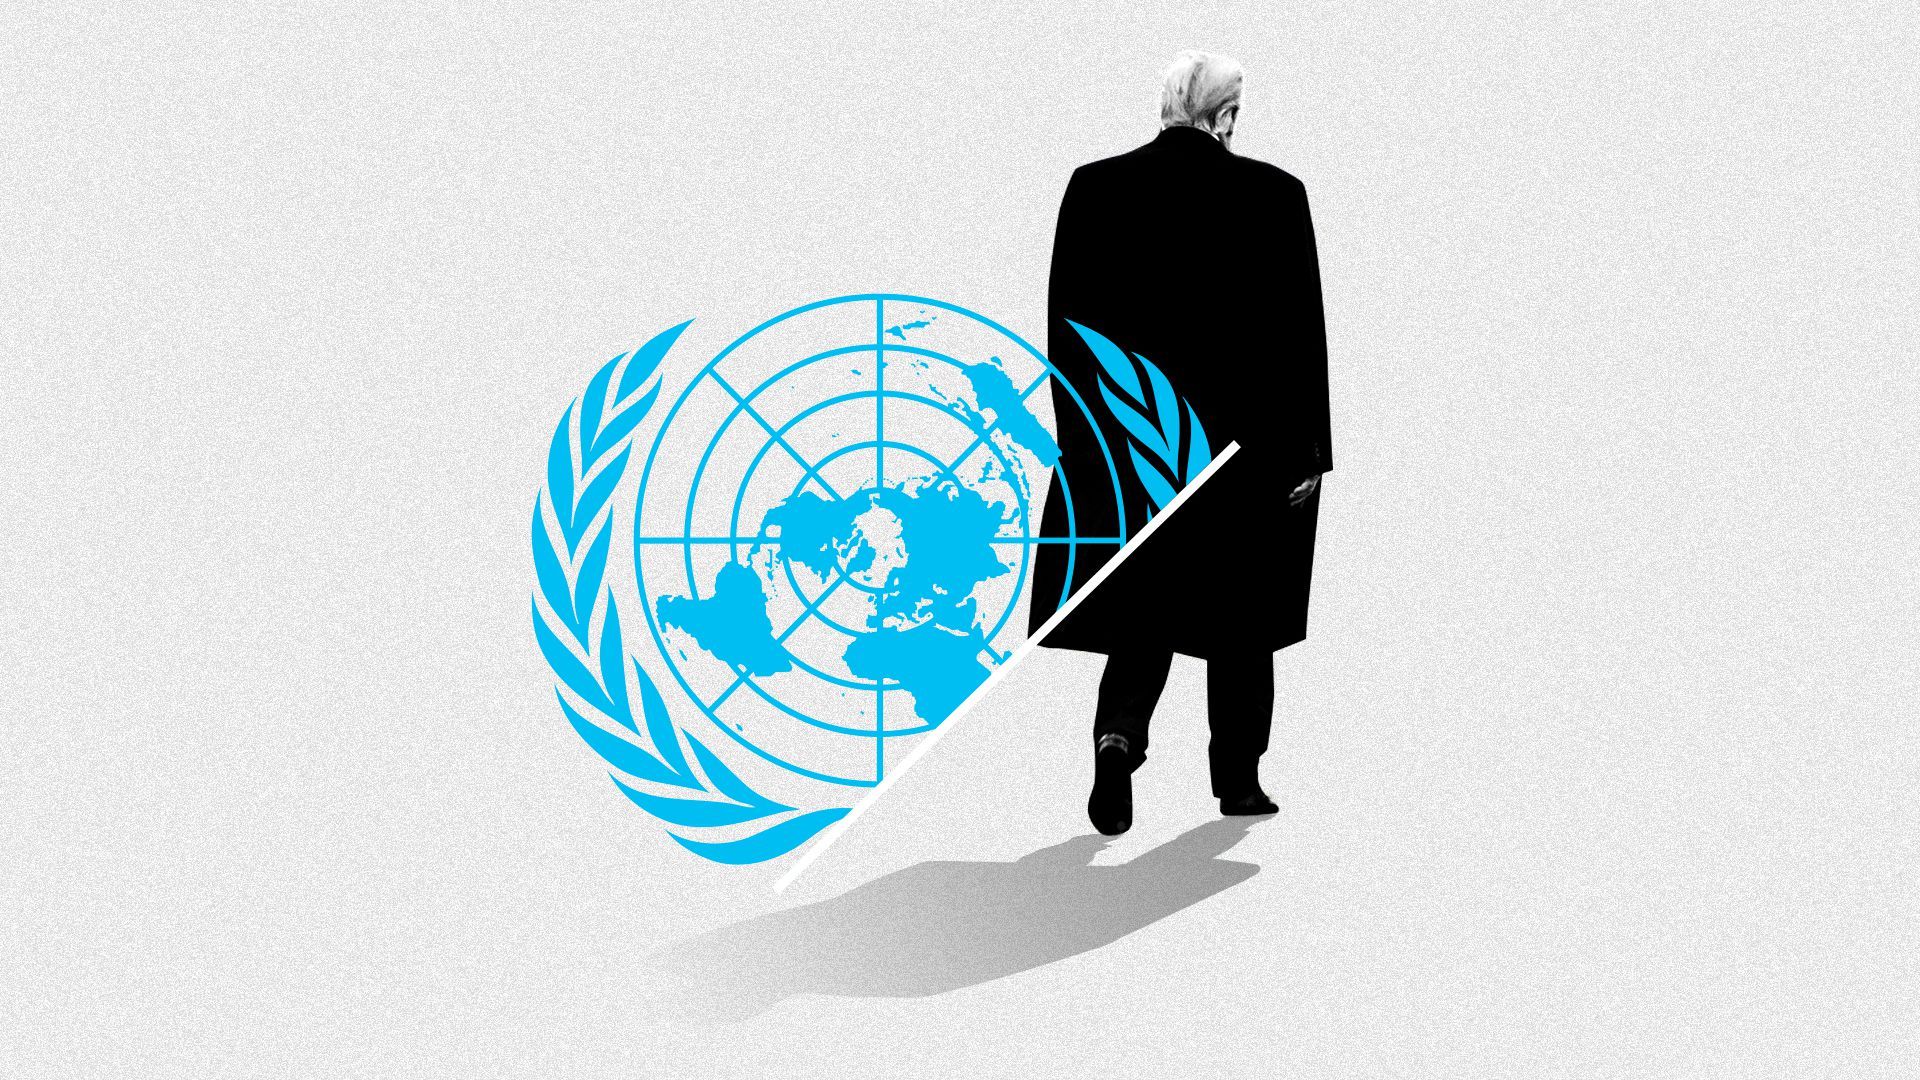 Illustrated collage of President Trump and the UN logo.